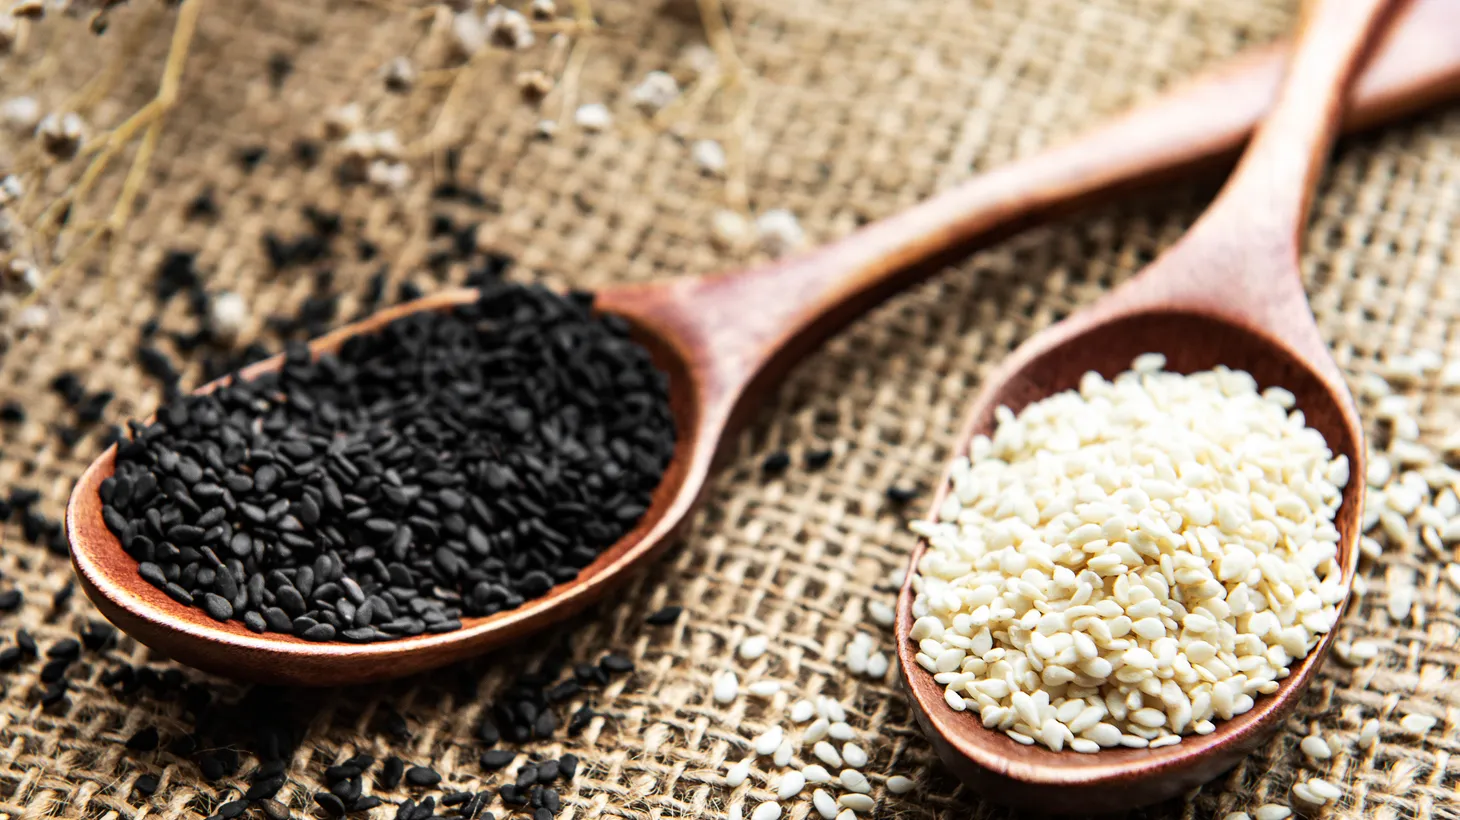 Black sesame seeds in Asian medicine are associated with heating energy and have a different flavor profile than their white counterparts.